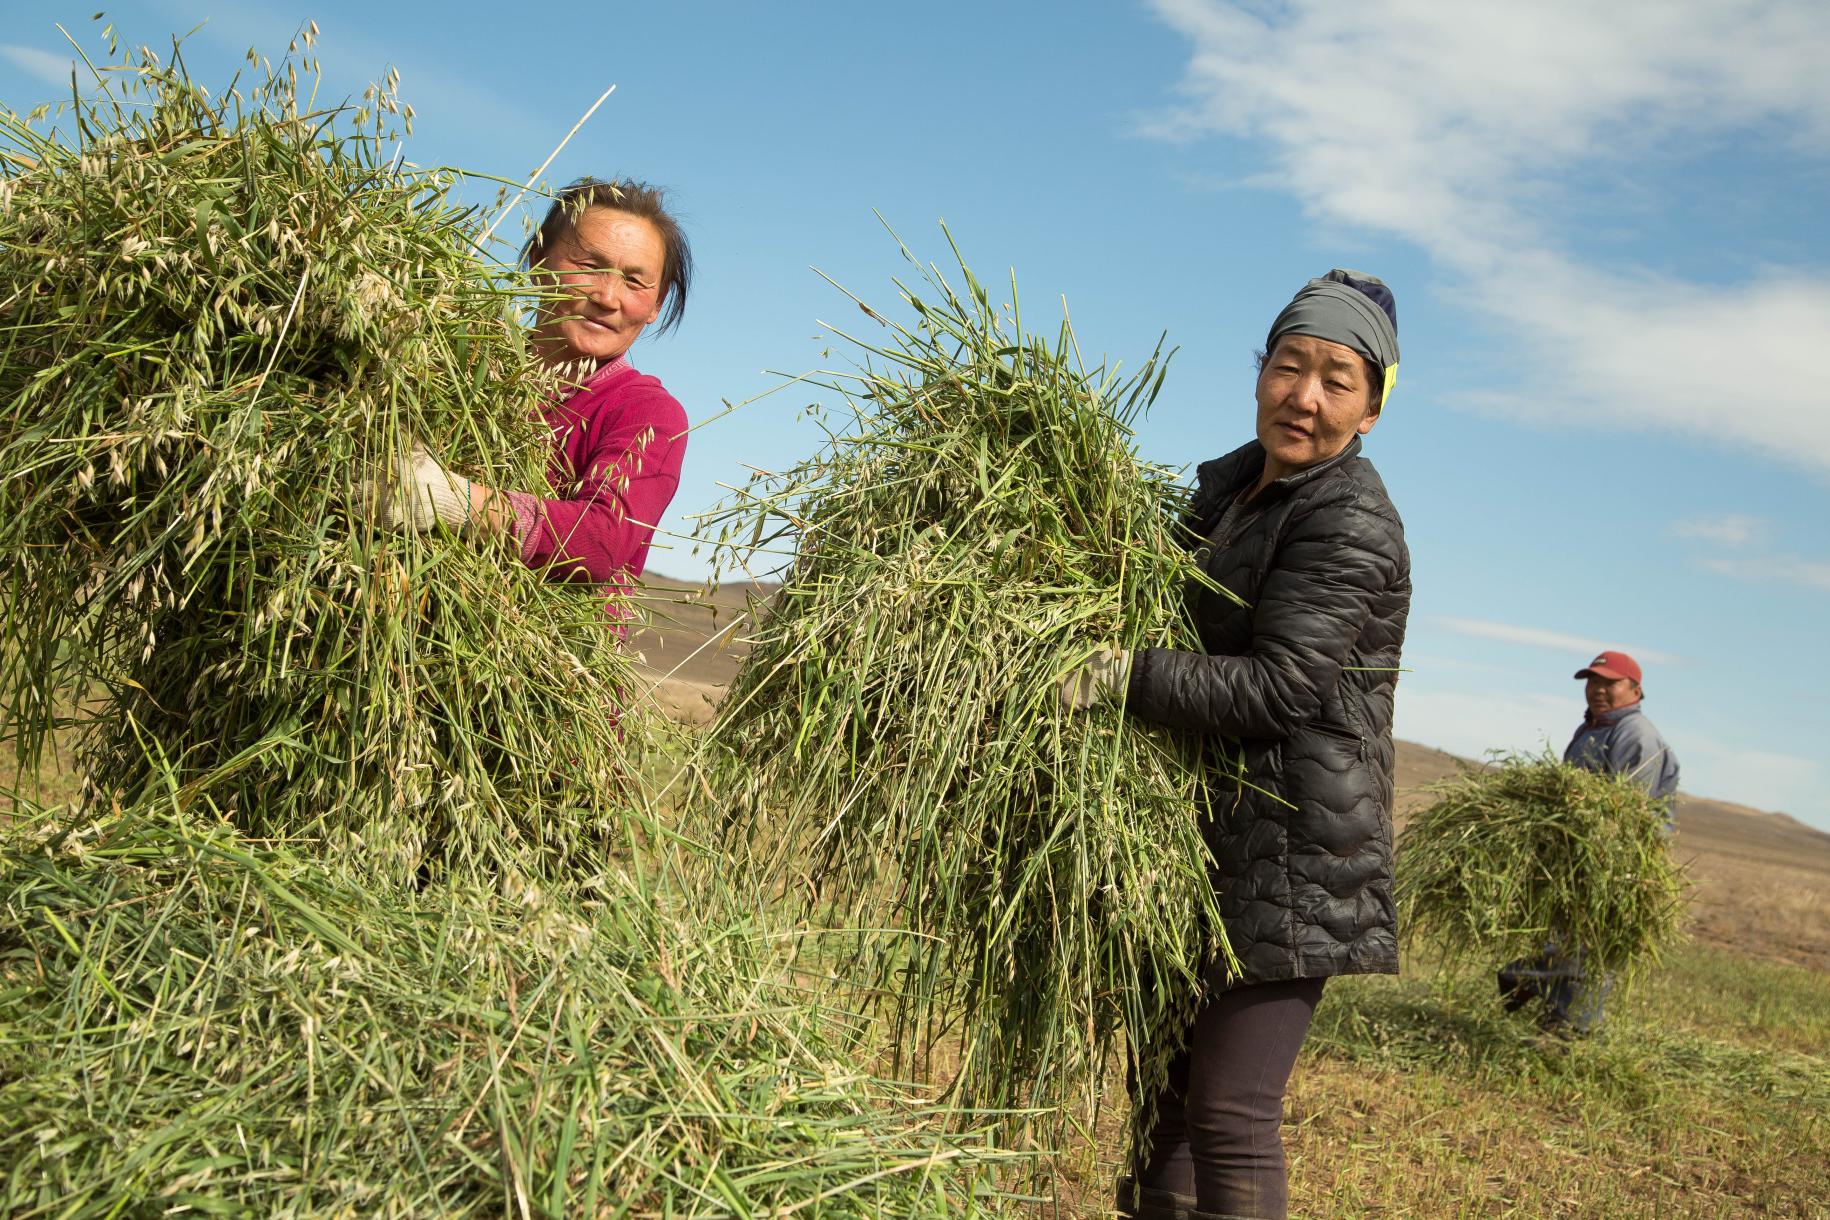 Three people in a field harvest large green bundles.